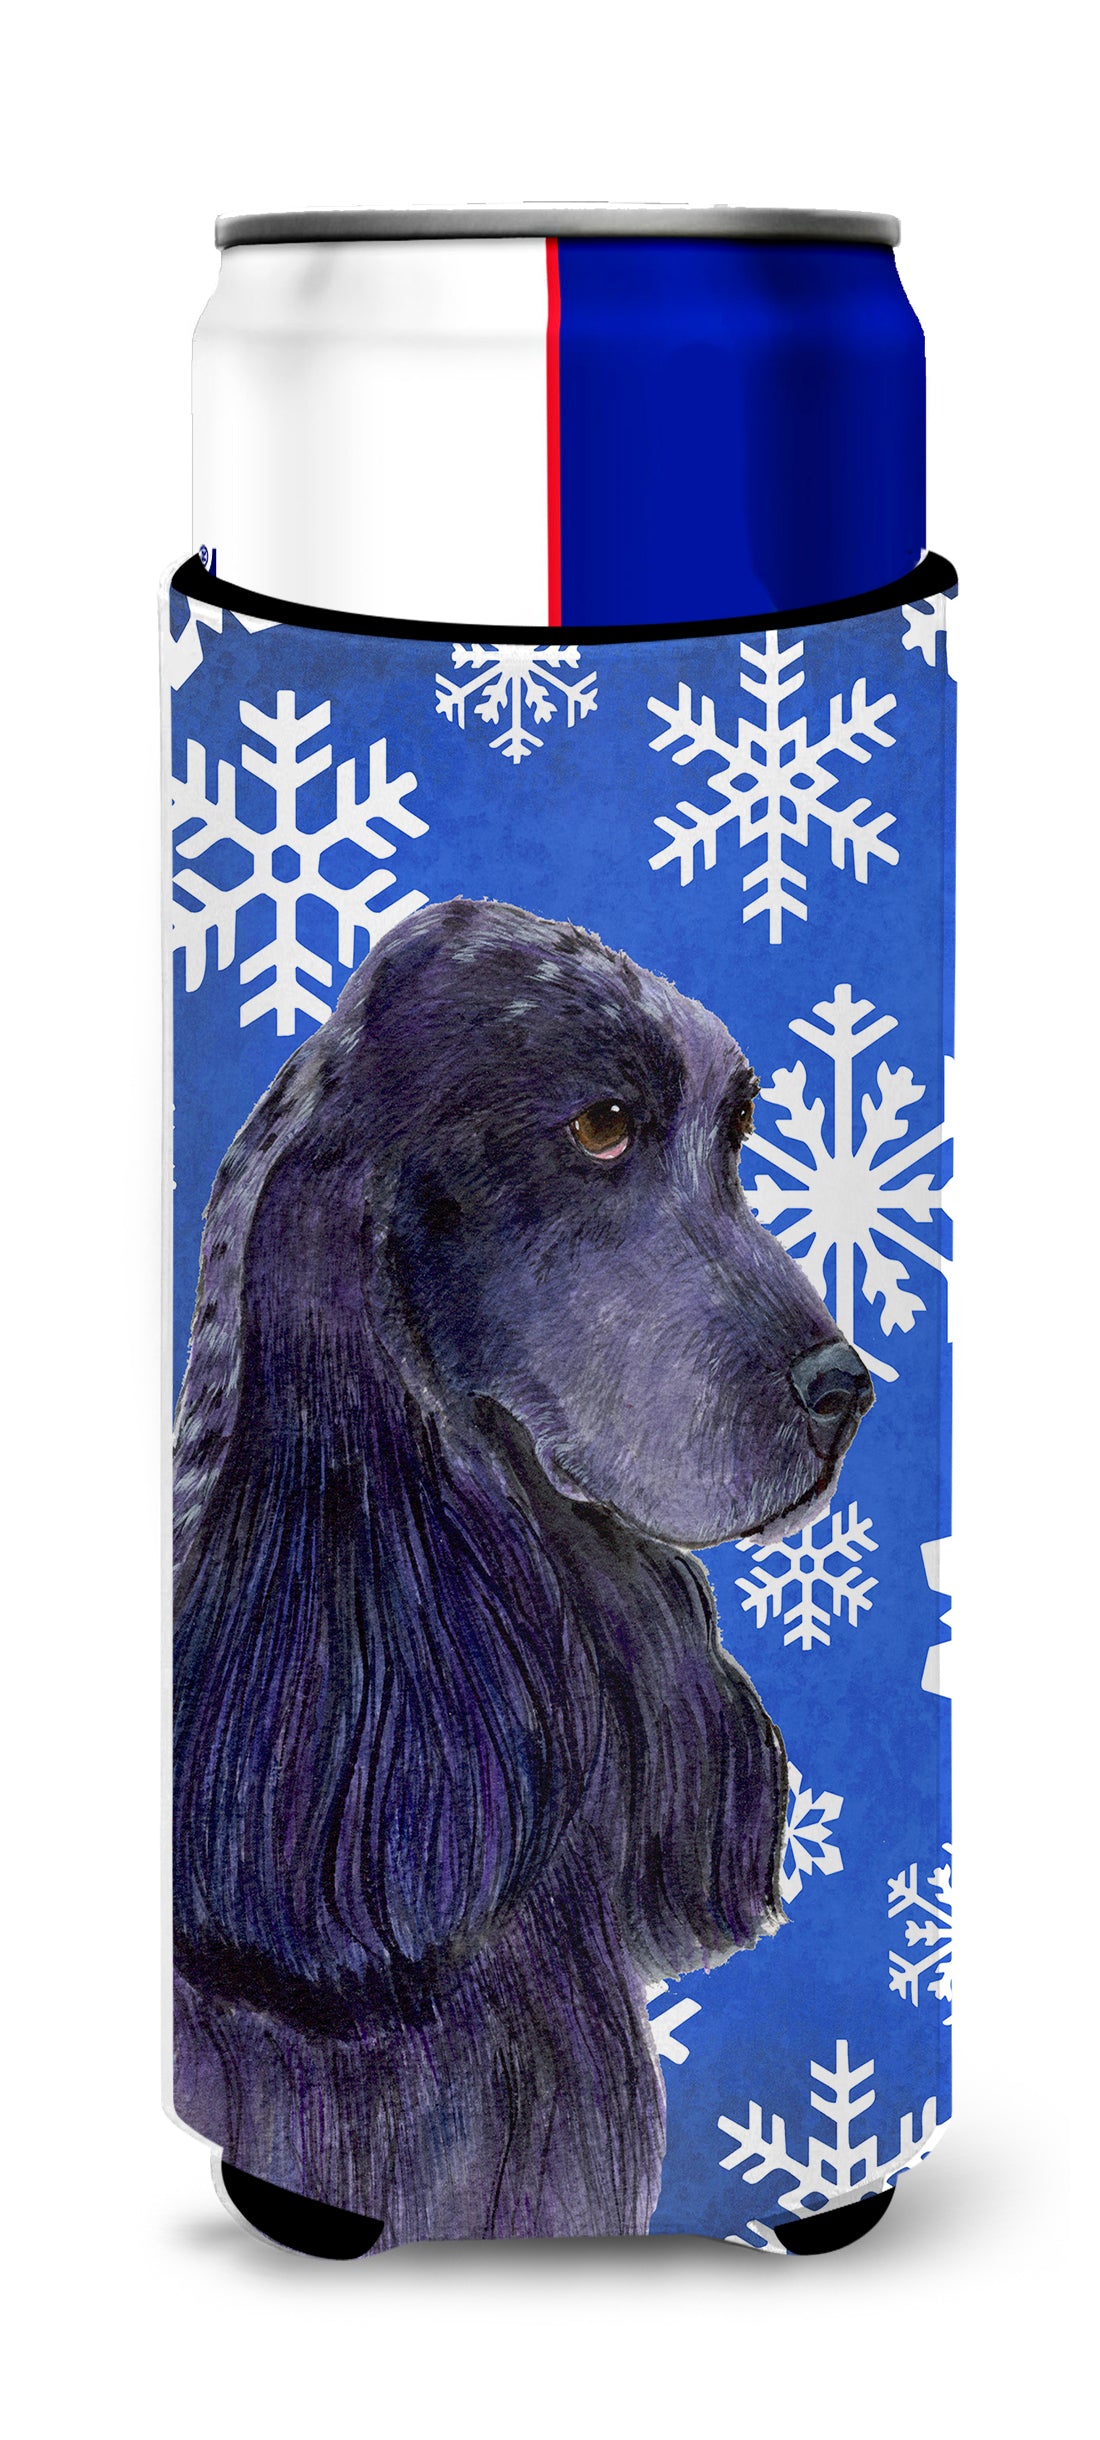 Cocker Spaniel Winter Snowflakes Holiday Ultra Beverage Insulators for slim cans SS4609MUK